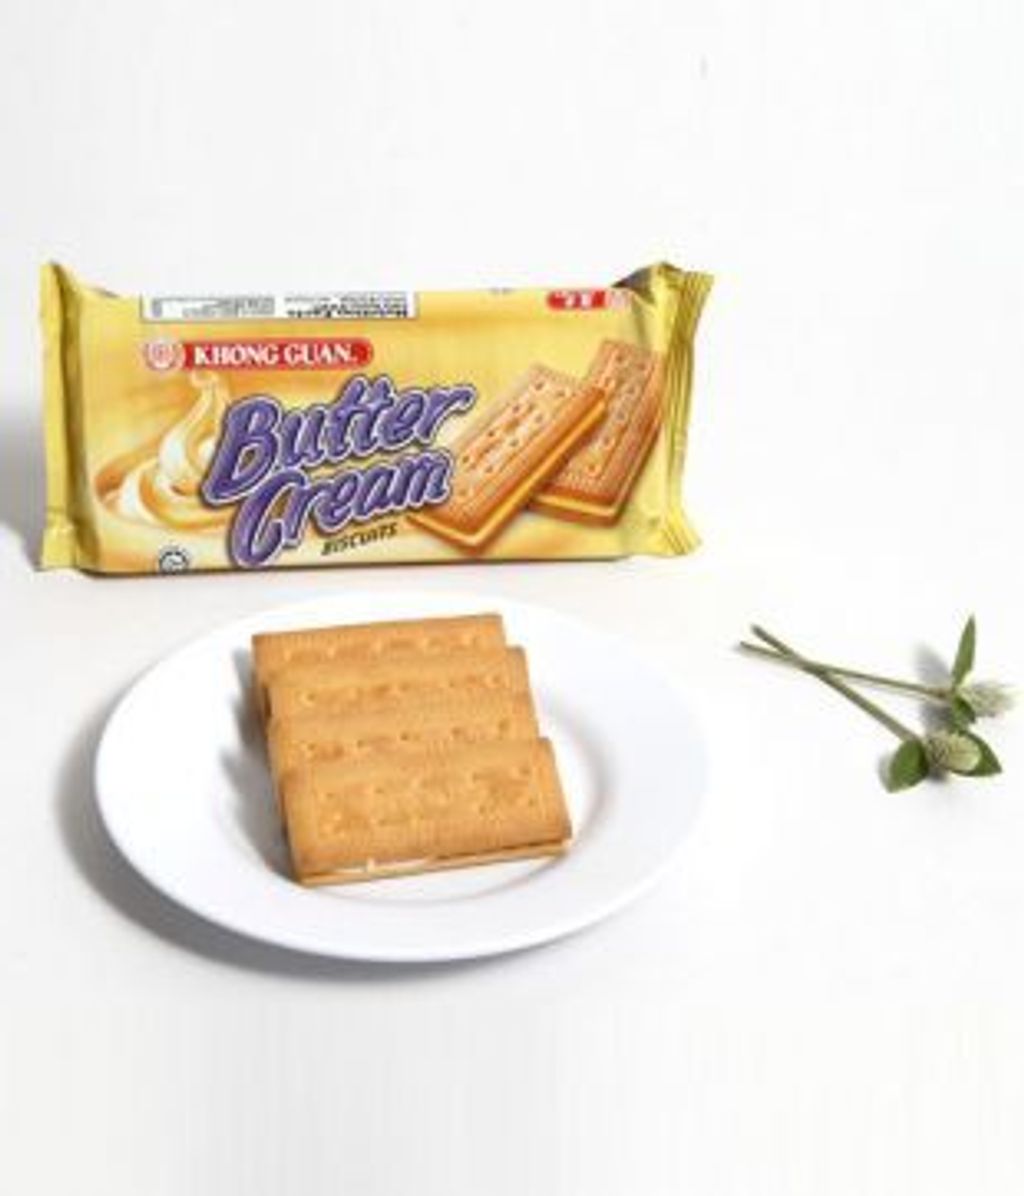 310x362-images-stories-products-biscuits66.jpg